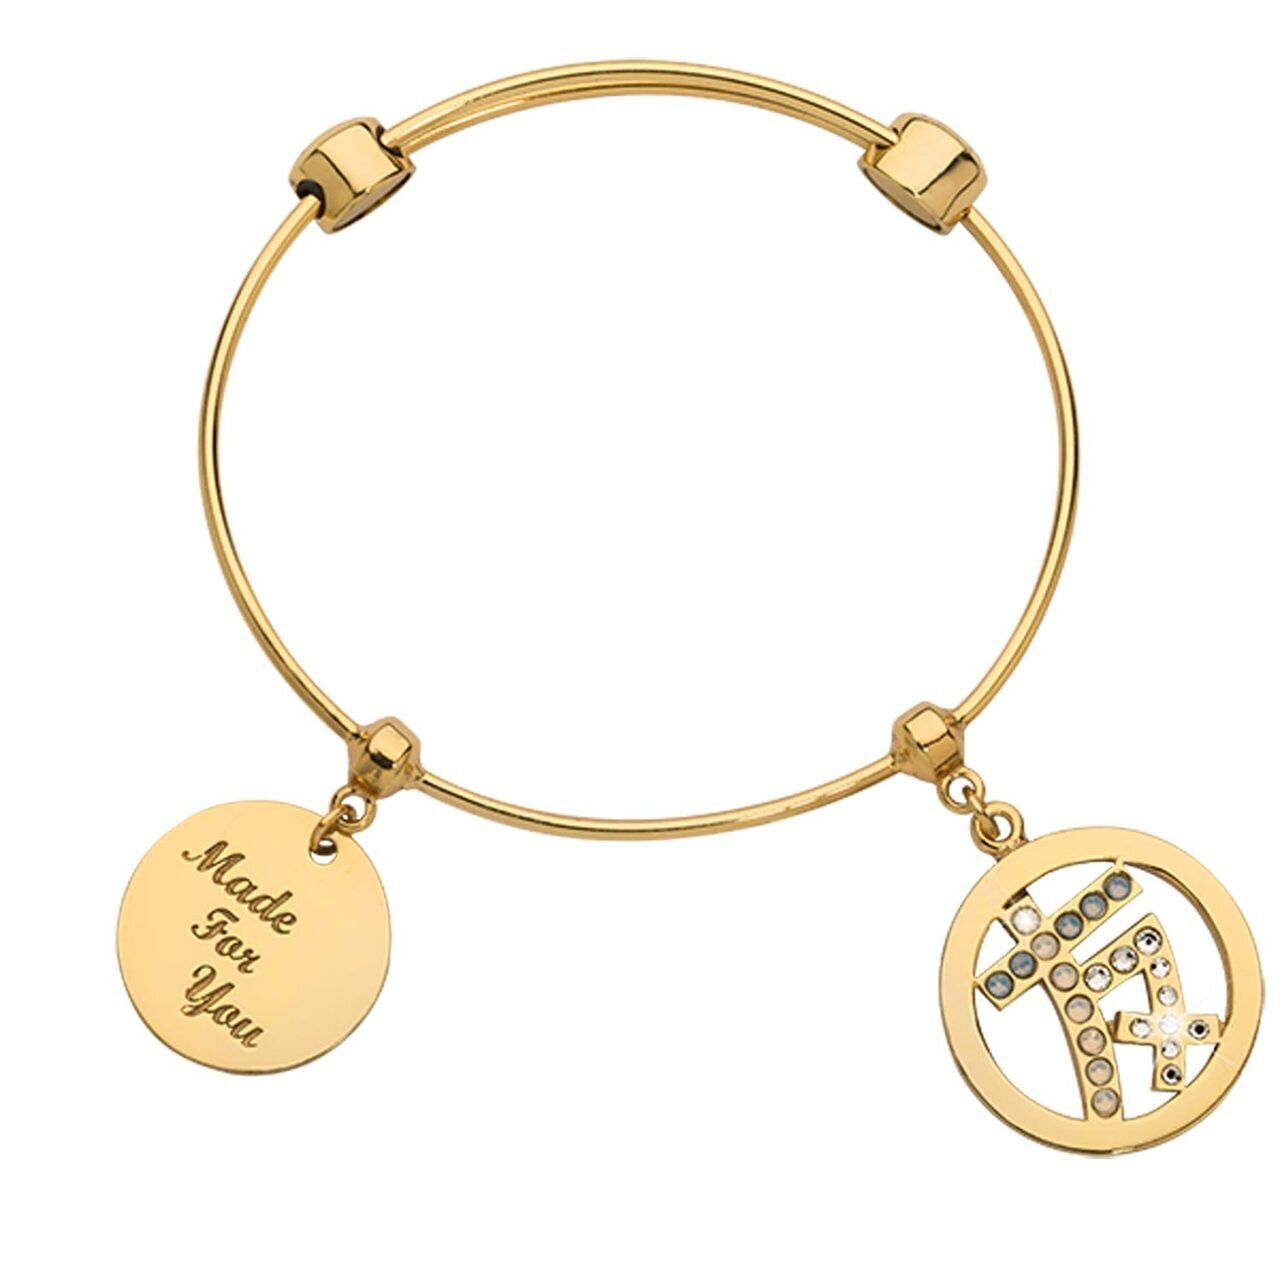 Nikki Lissoni Charm Bangle with Two Fixed Charms Infused with Emotion By Chinese Sign For Friendship Gold-plated 17cm B1150G17